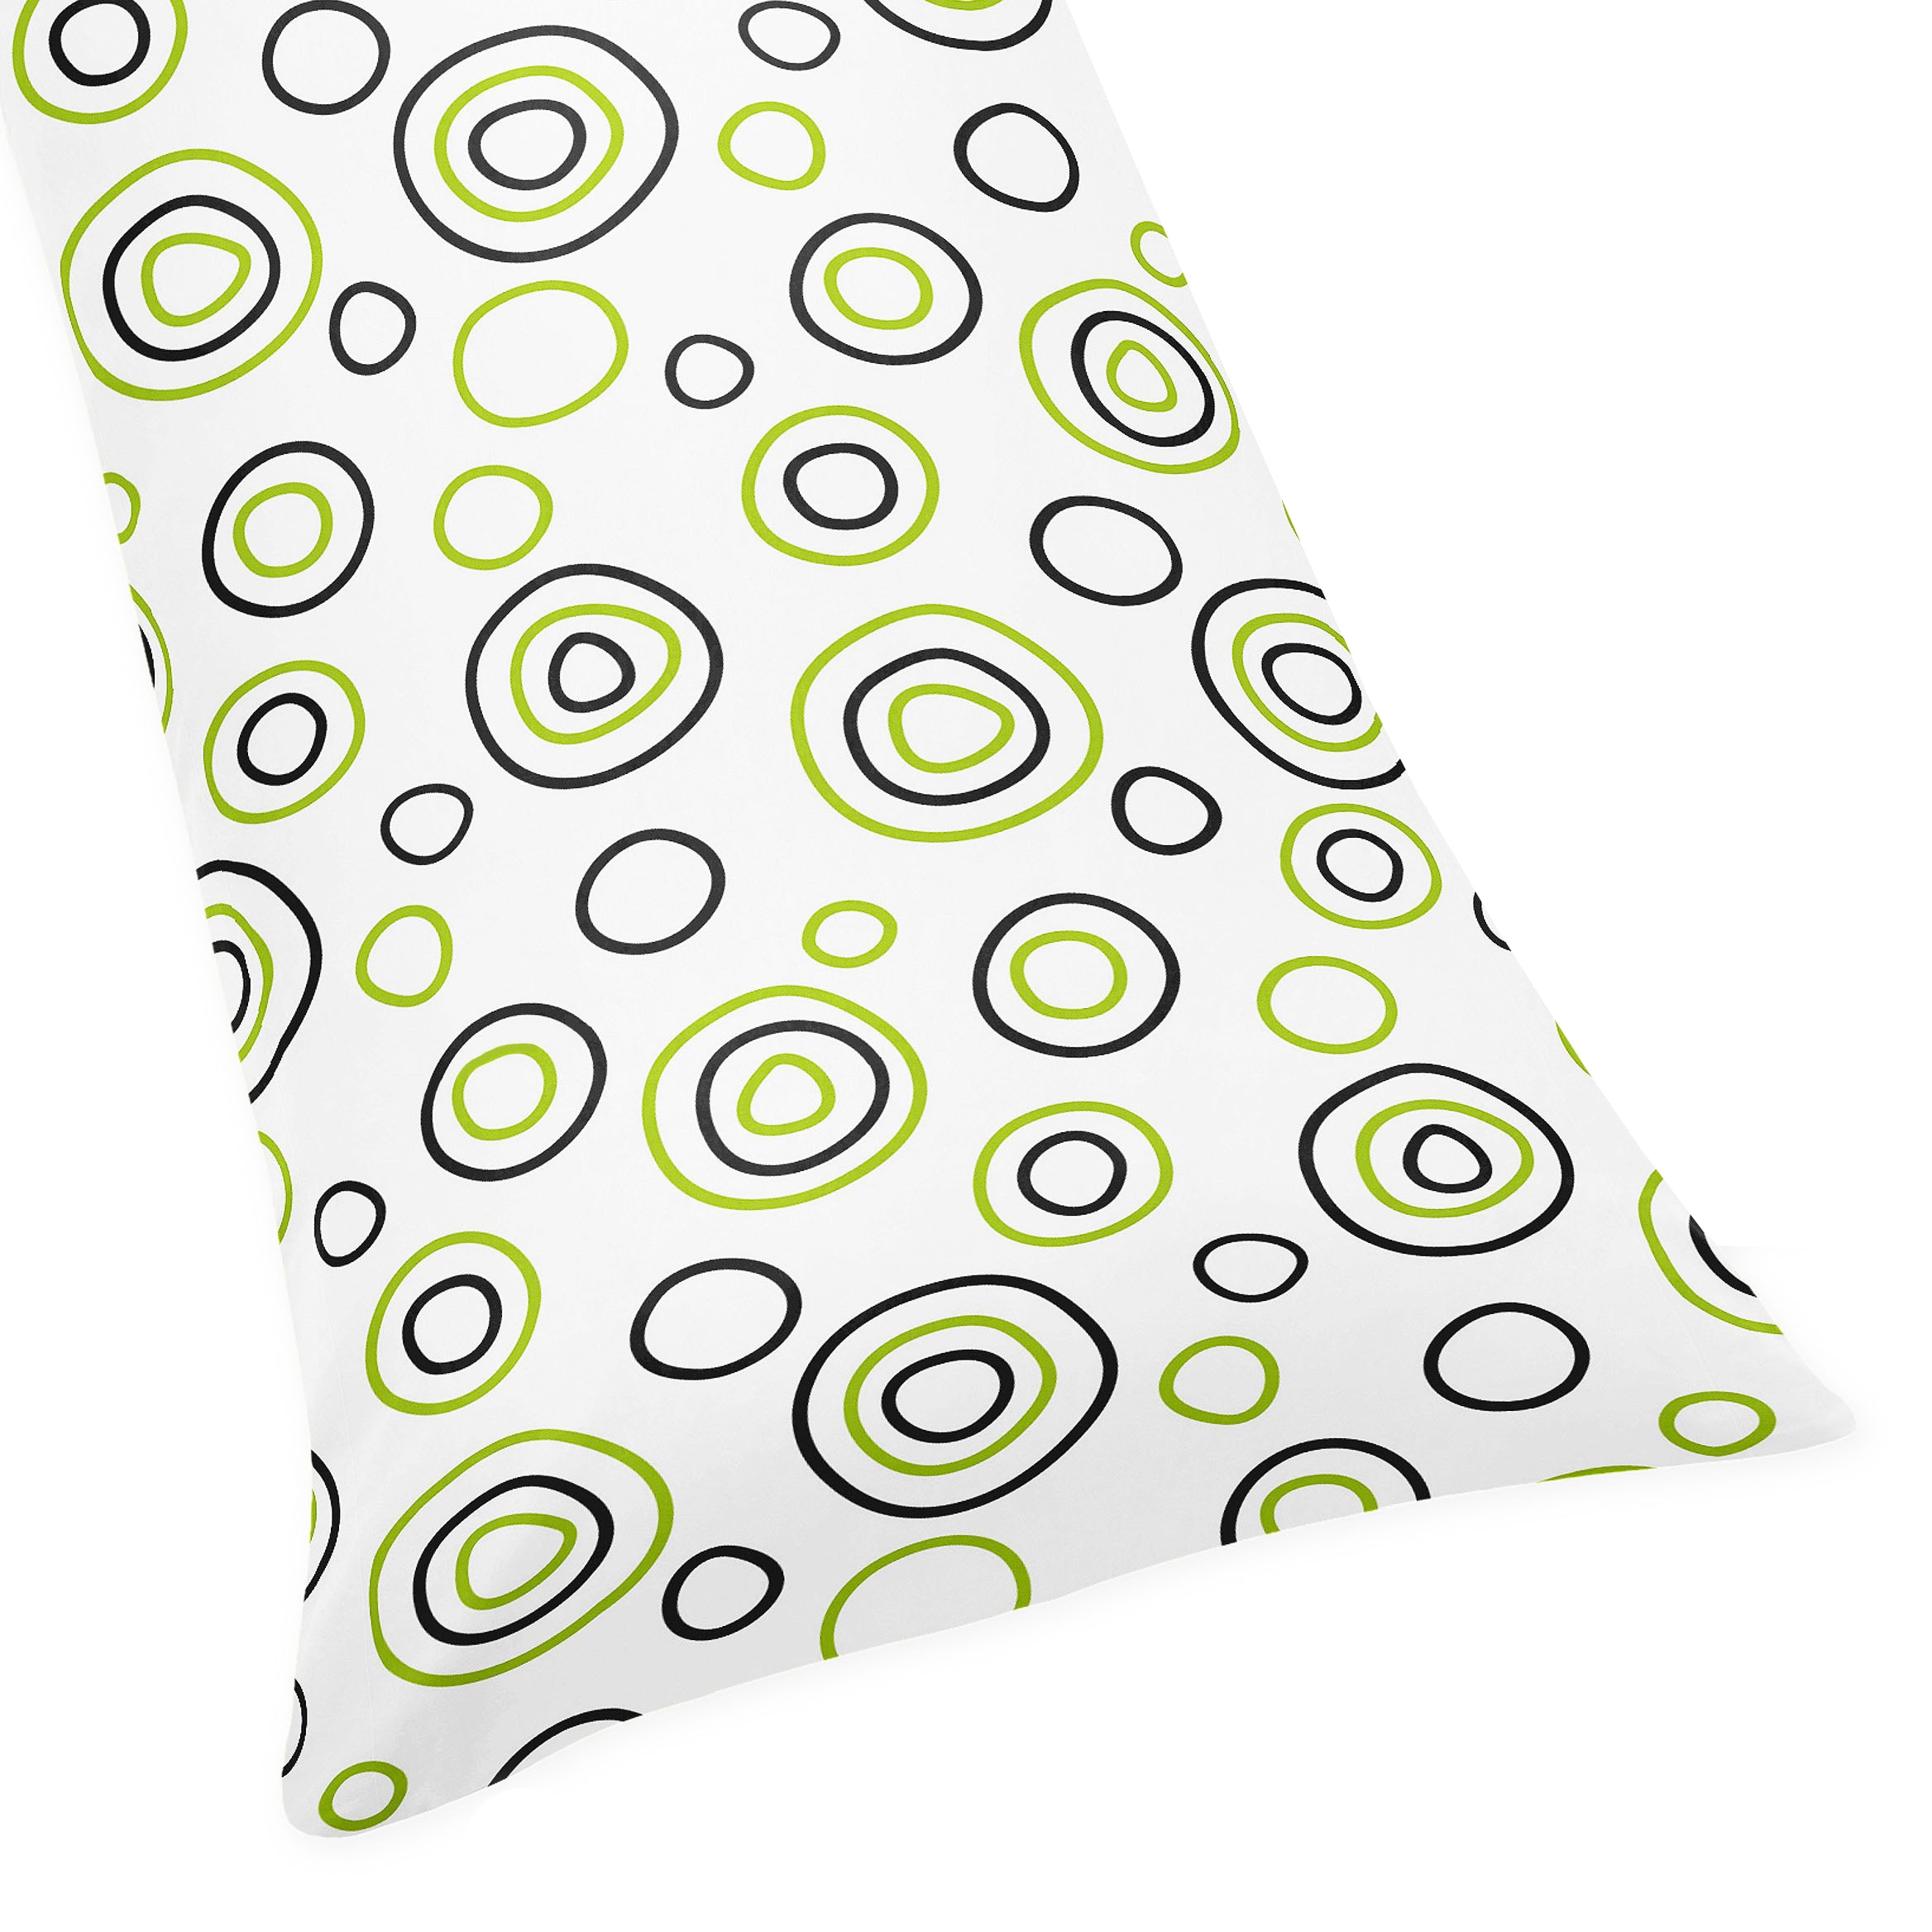 Sweet Jojo Designs Spirodot Lime And Black Full Length Double Zippered Body Pillow Case Cover (Lime green, black, whiteDimensions 20 inches wide x 54 inches longThe digital images we display have the most accurate color possible. However, due to differen